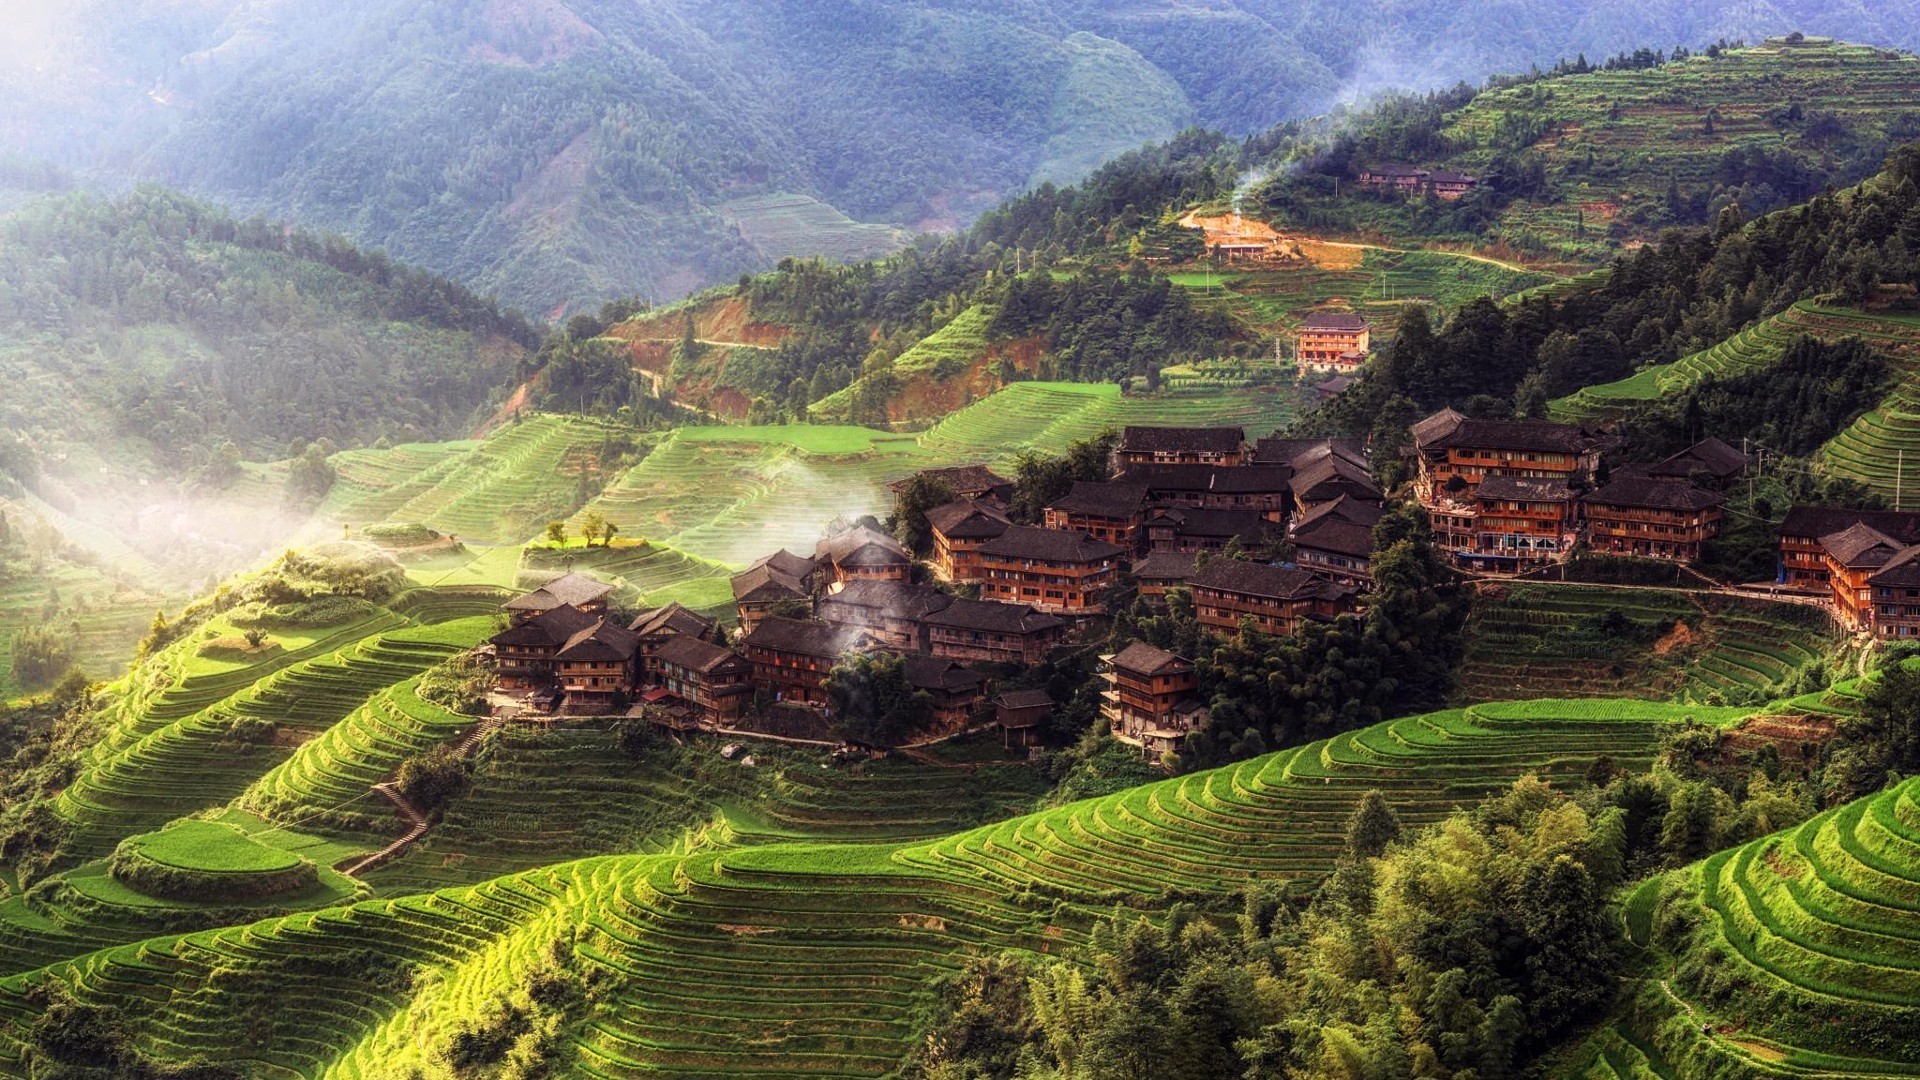 nature, Landscape, Trees, China, Asia, Rice Paddy, Morning, Mist, House, Hill, Forest, Terraced Field, Village Wallpaper